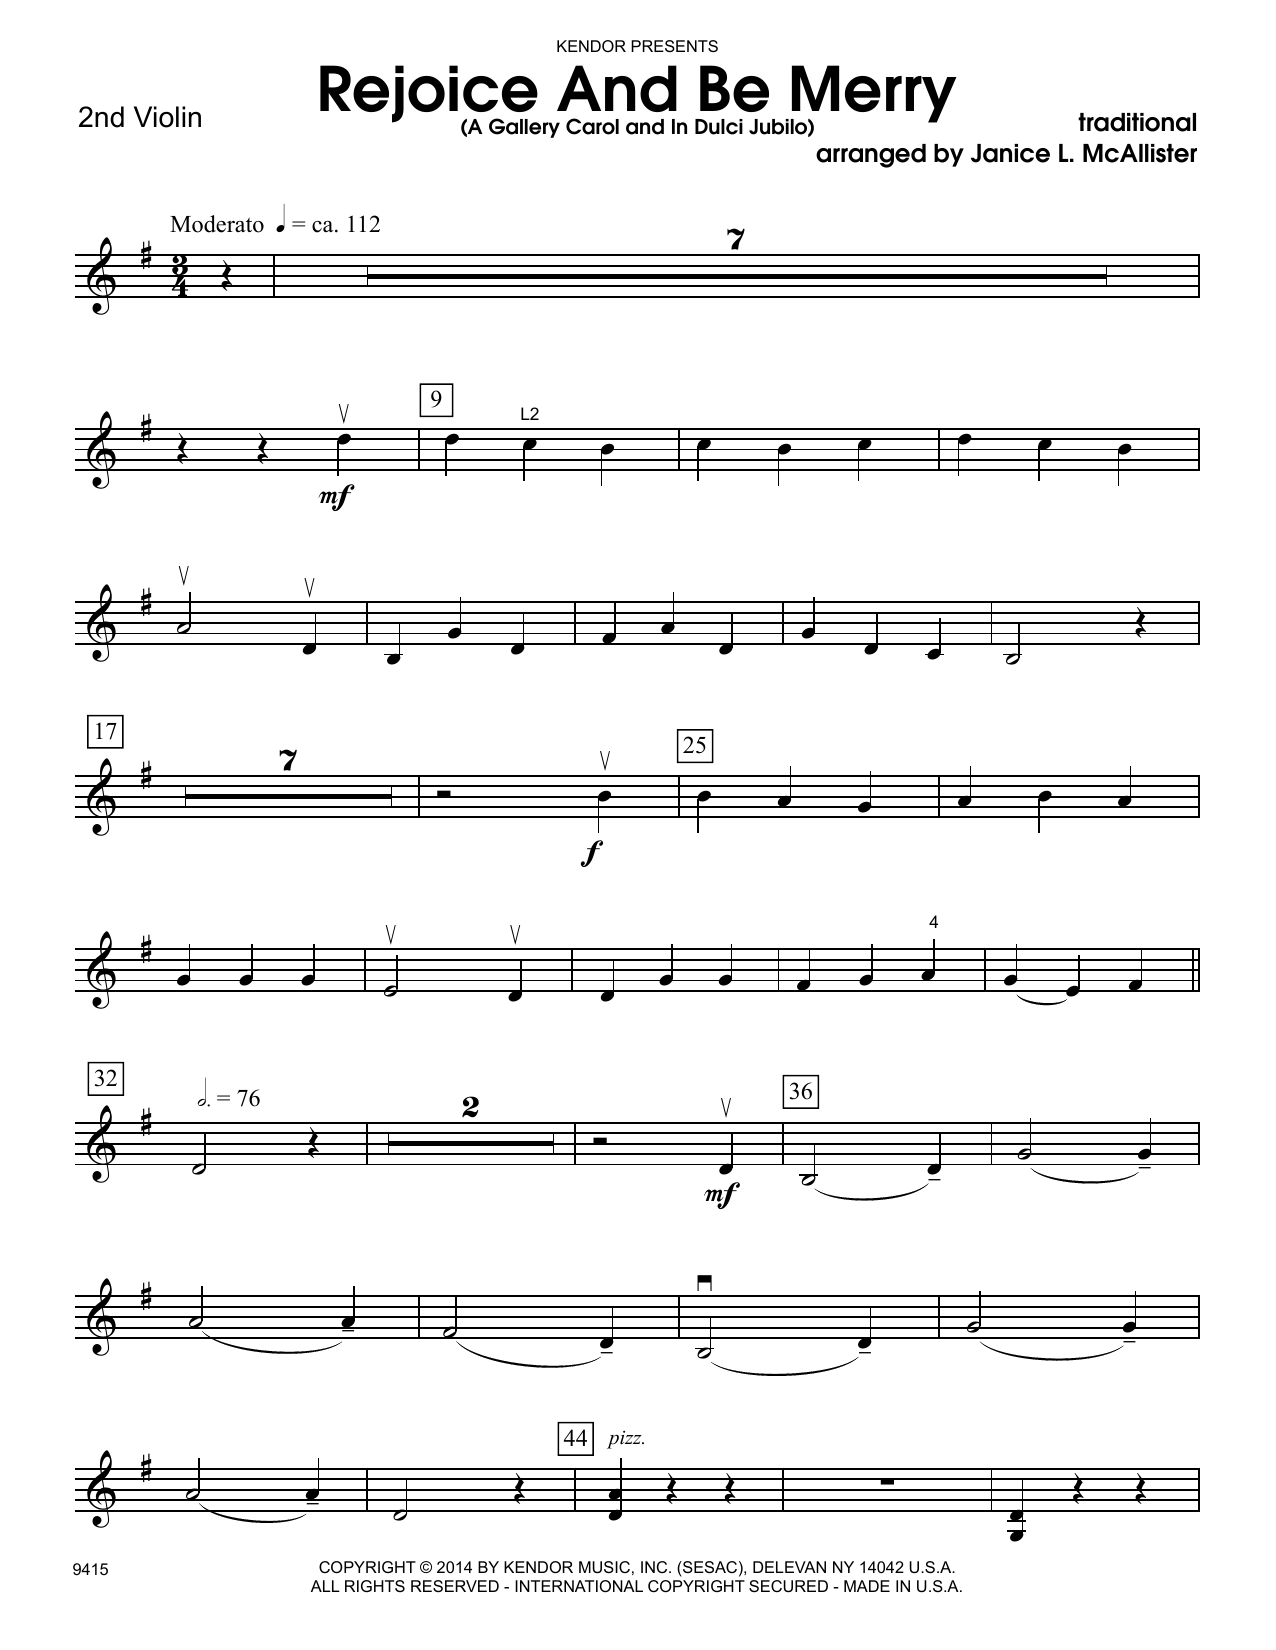 Rejoice And Be Merry (A Gallery Carol and In Dulci Jubilo) - 2nd Violin sheet music